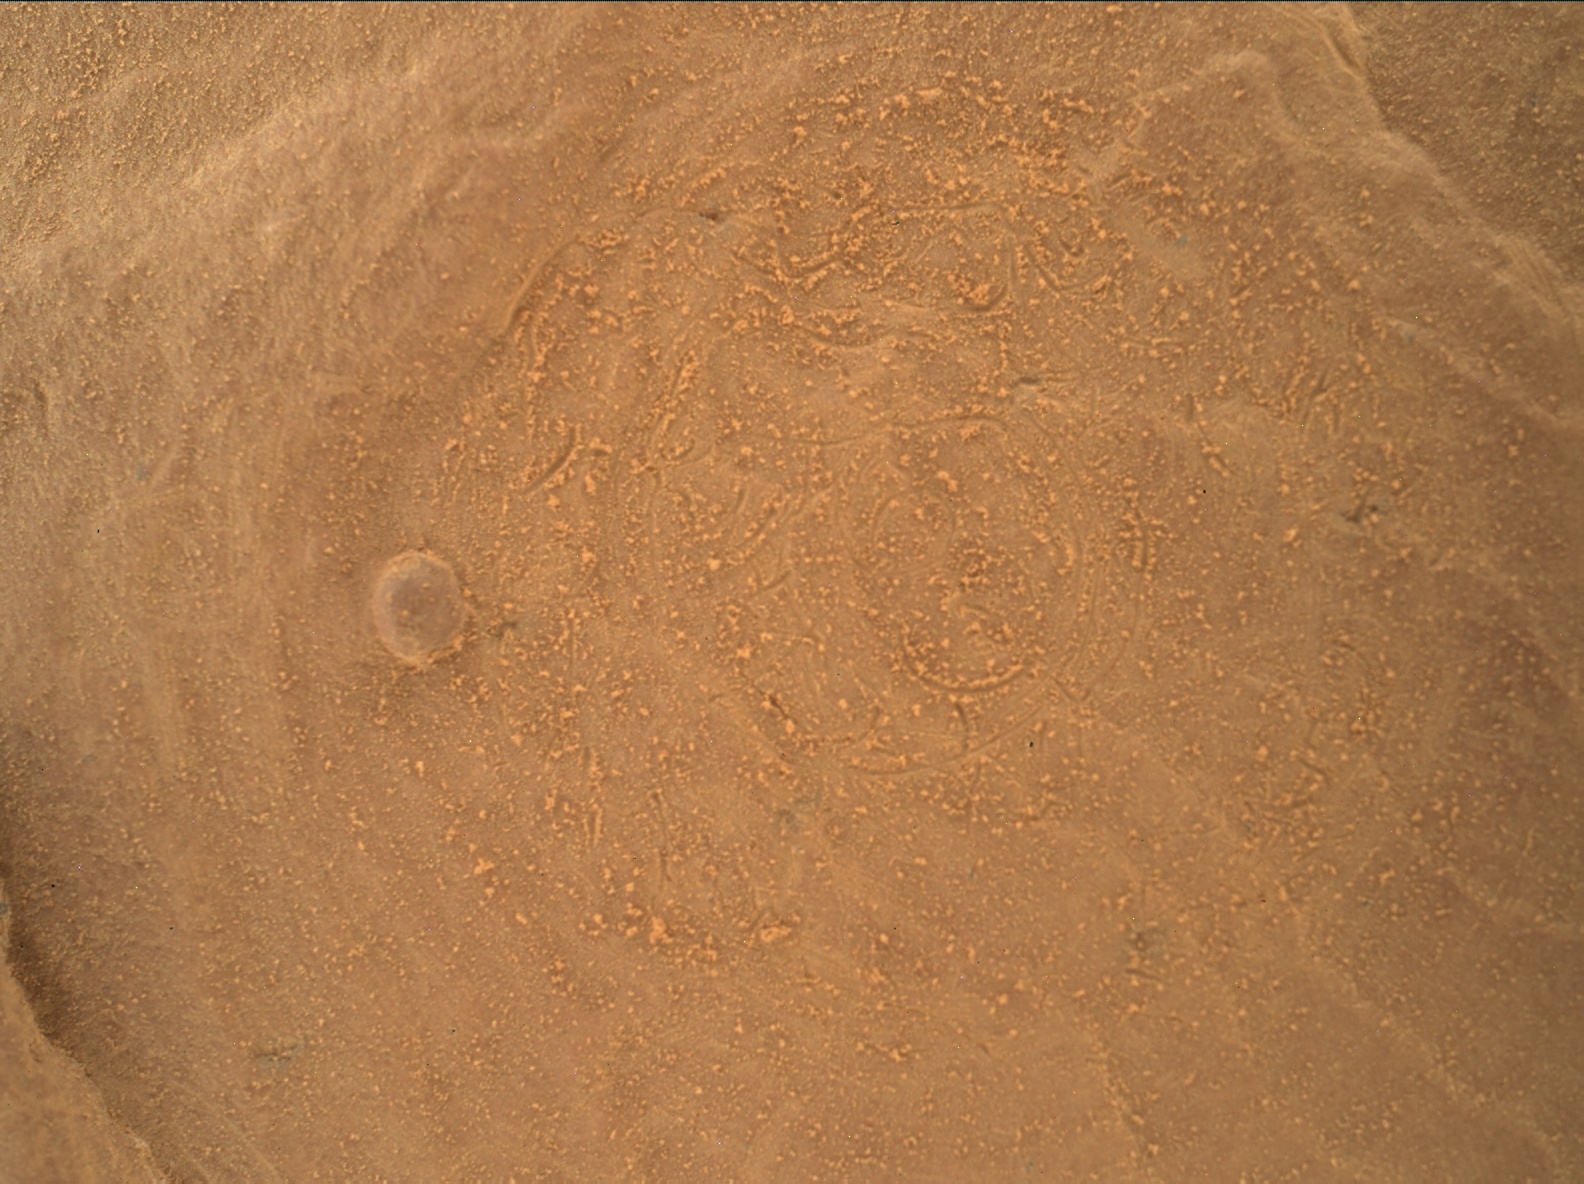 Nasa's Mars rover Curiosity acquired this image using its Mars Hand Lens Imager (MAHLI) on Sol 1736